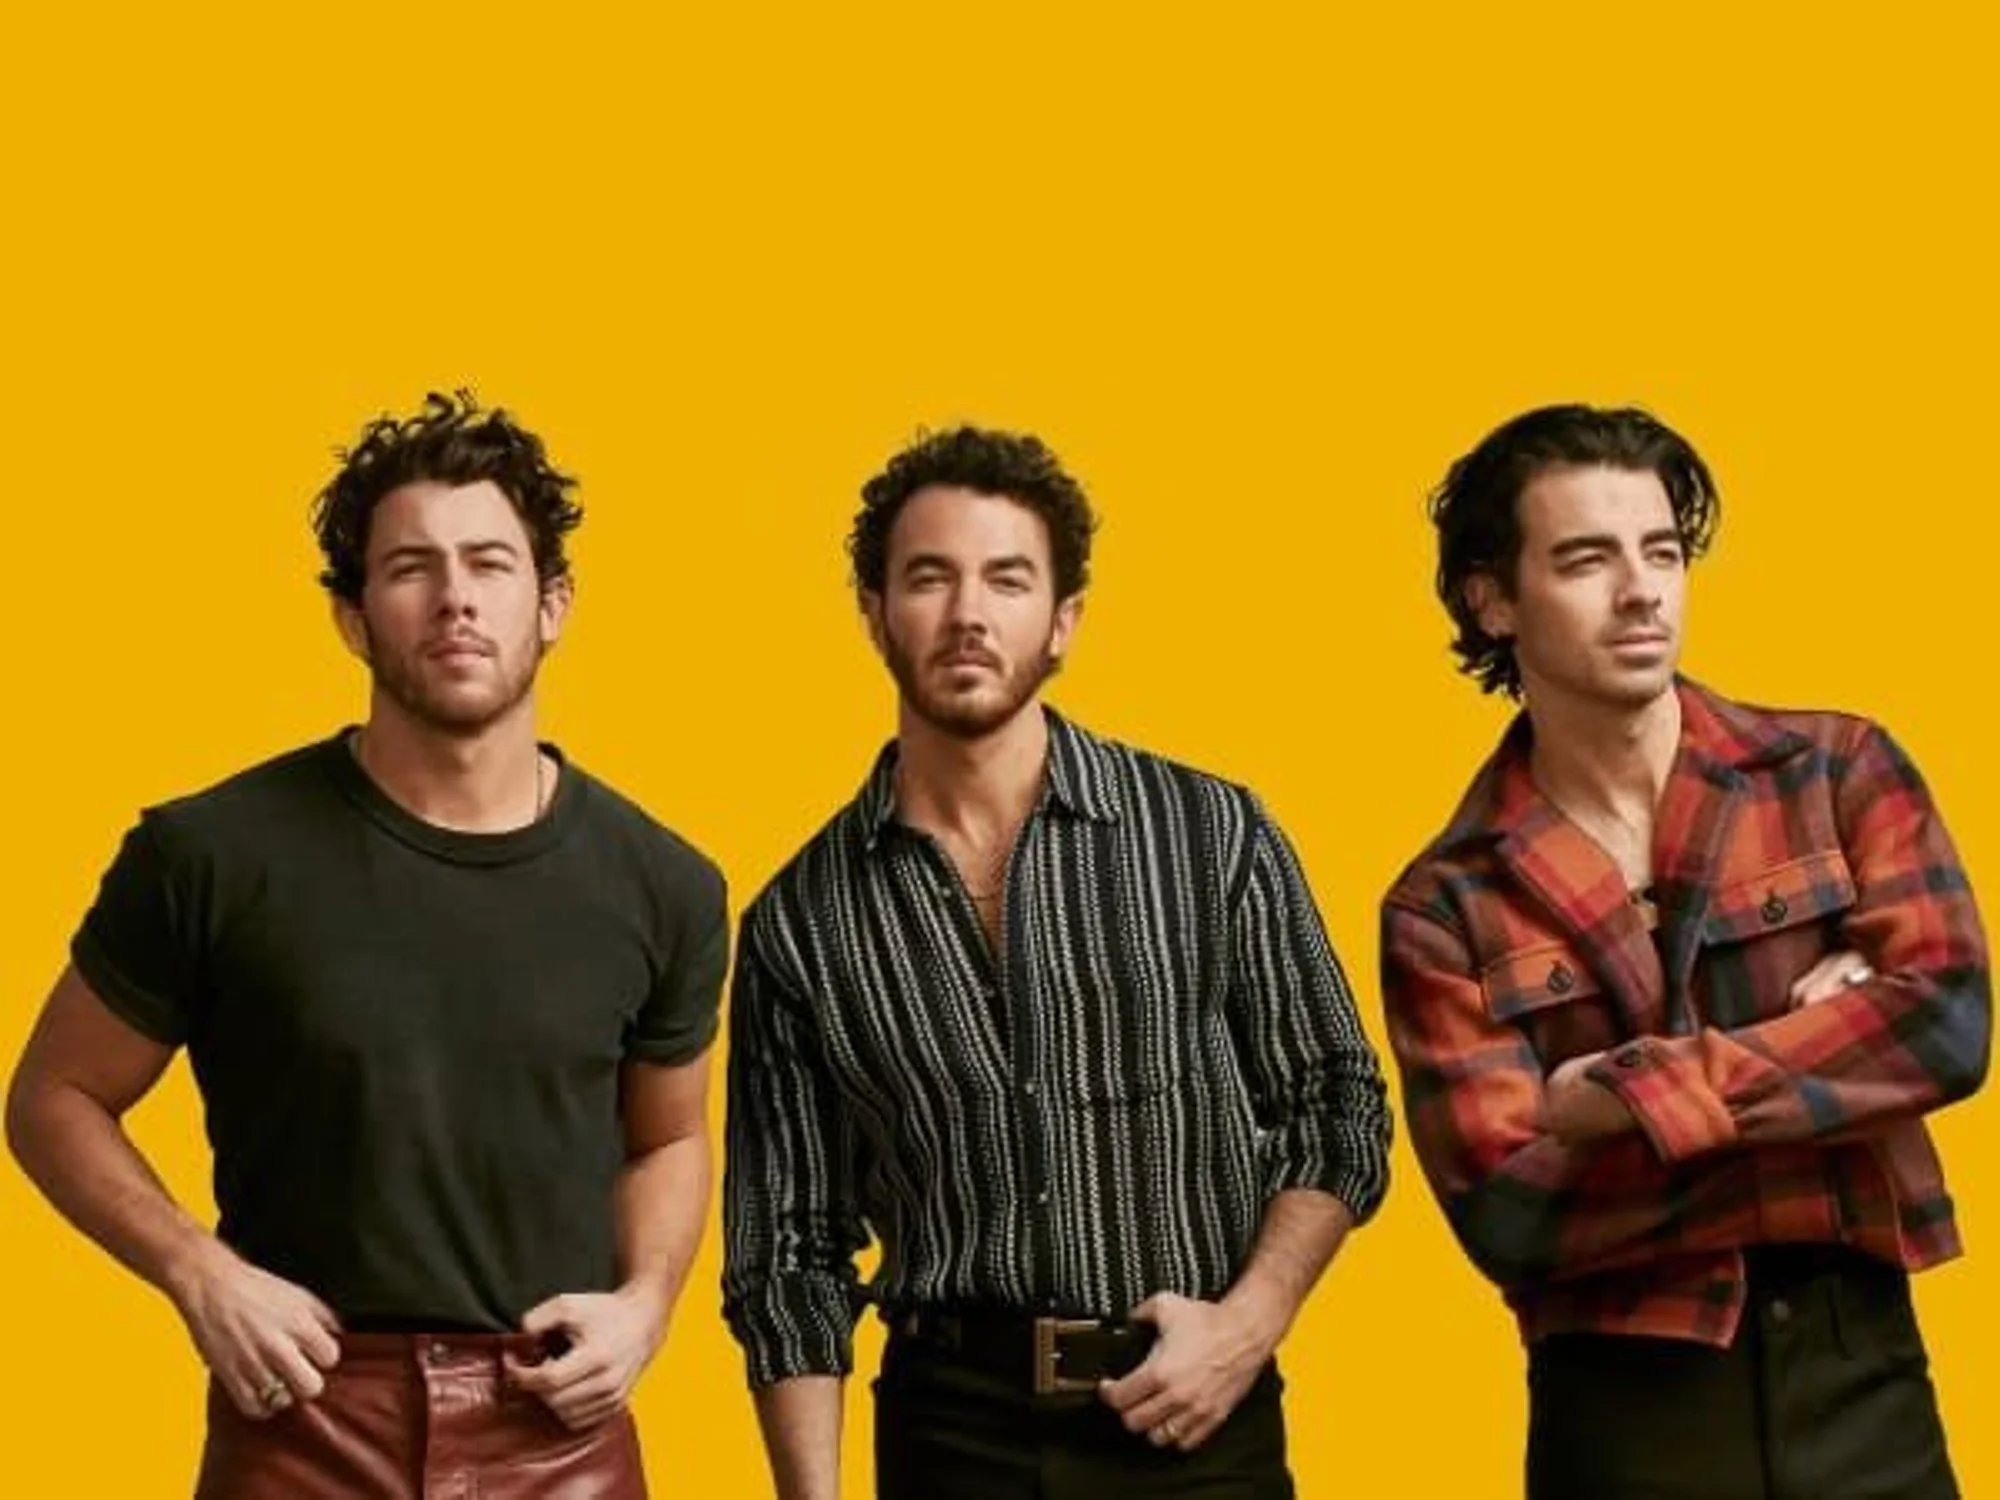 JONAS BROTHERS AT THE HOUSTON RODEO